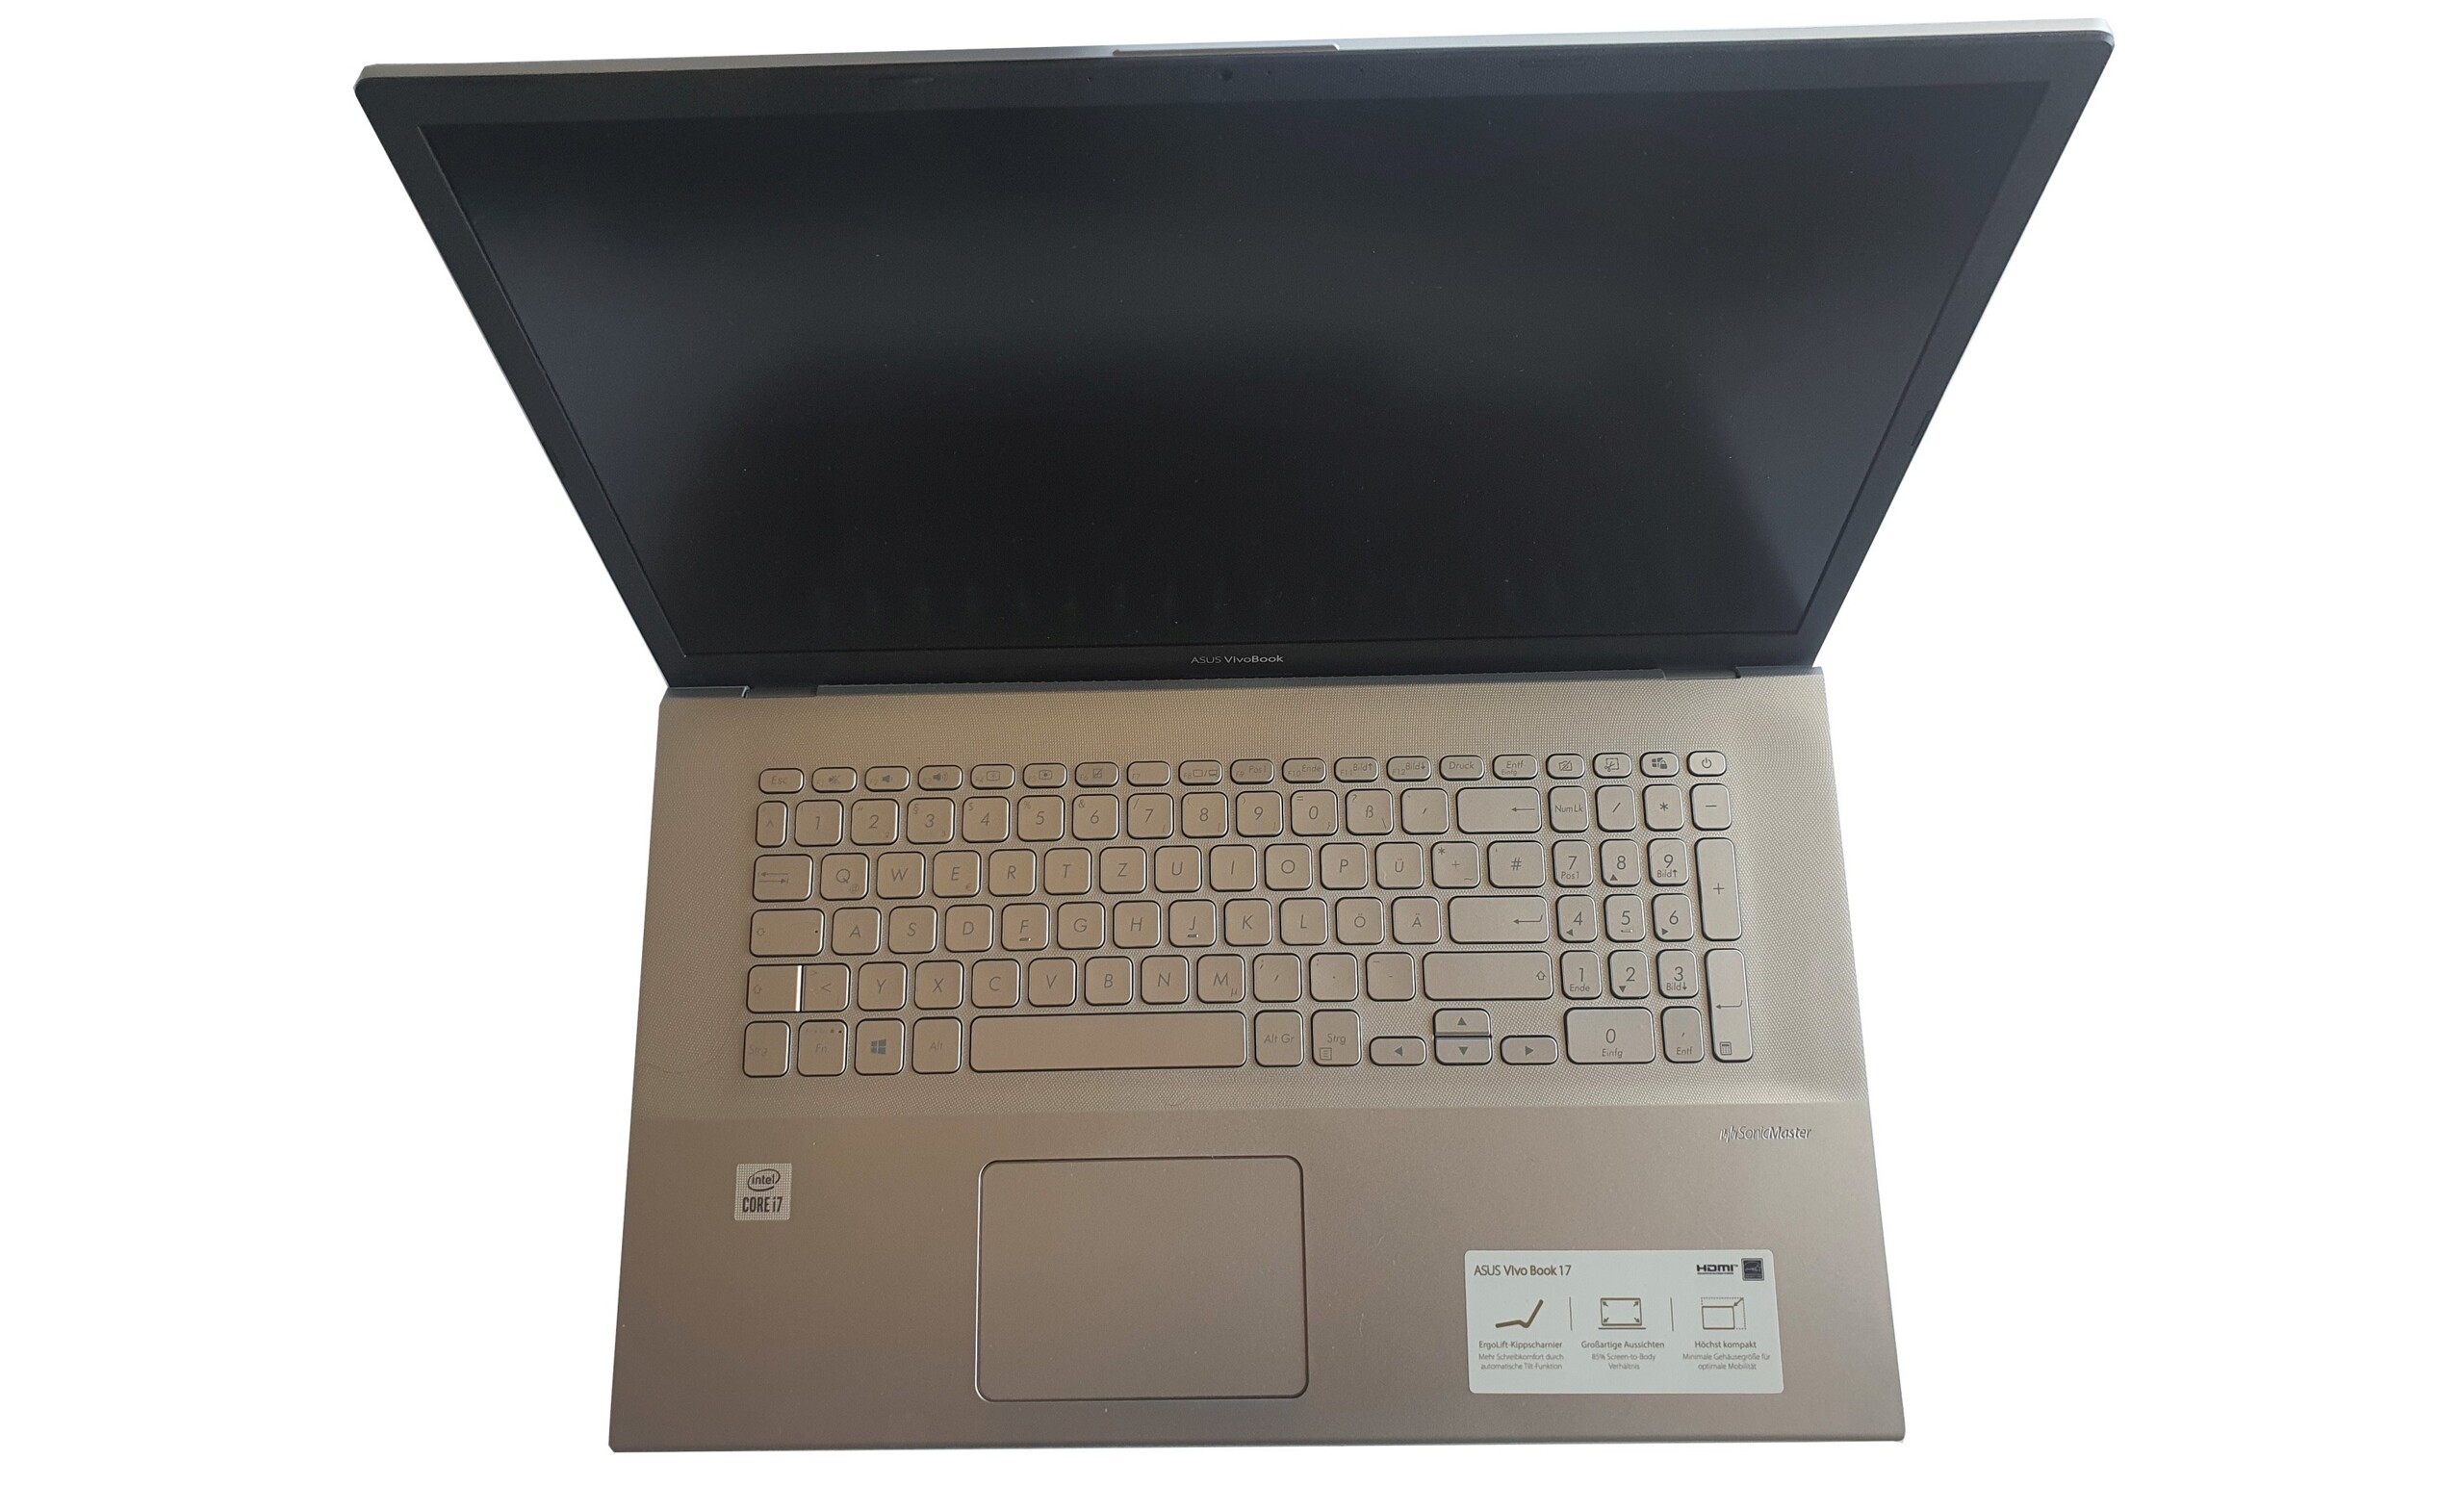 VivoBook 17 test: Affordable 17-inch laptop with semi-passive cooling - NotebookCheck.net News